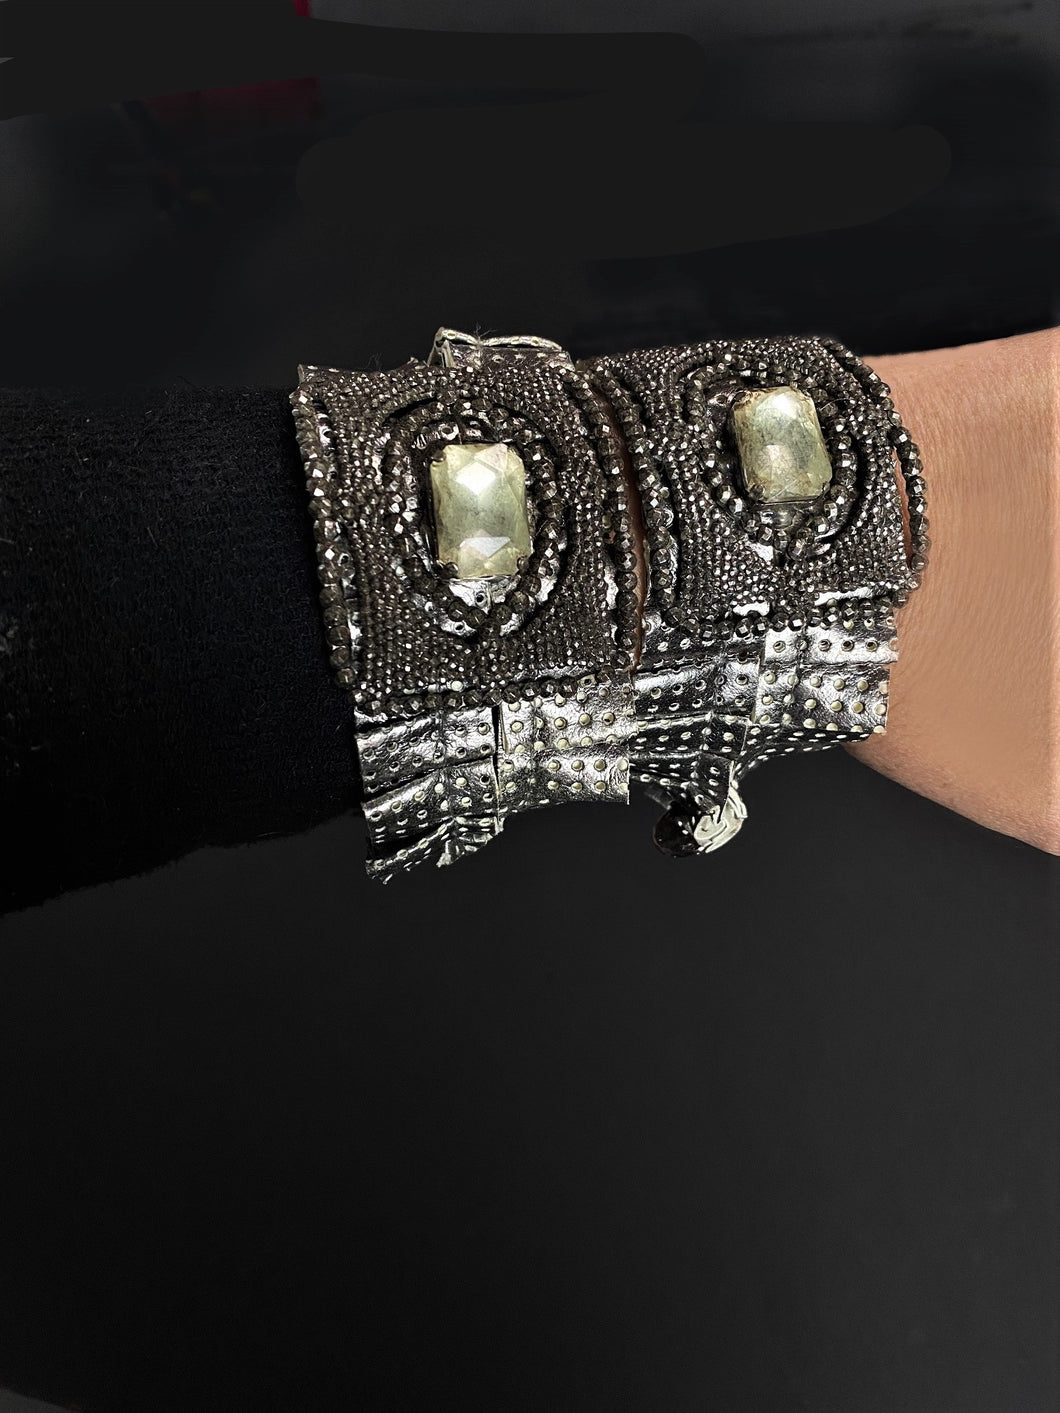 Pair of 18th Century Marcasite Armbands